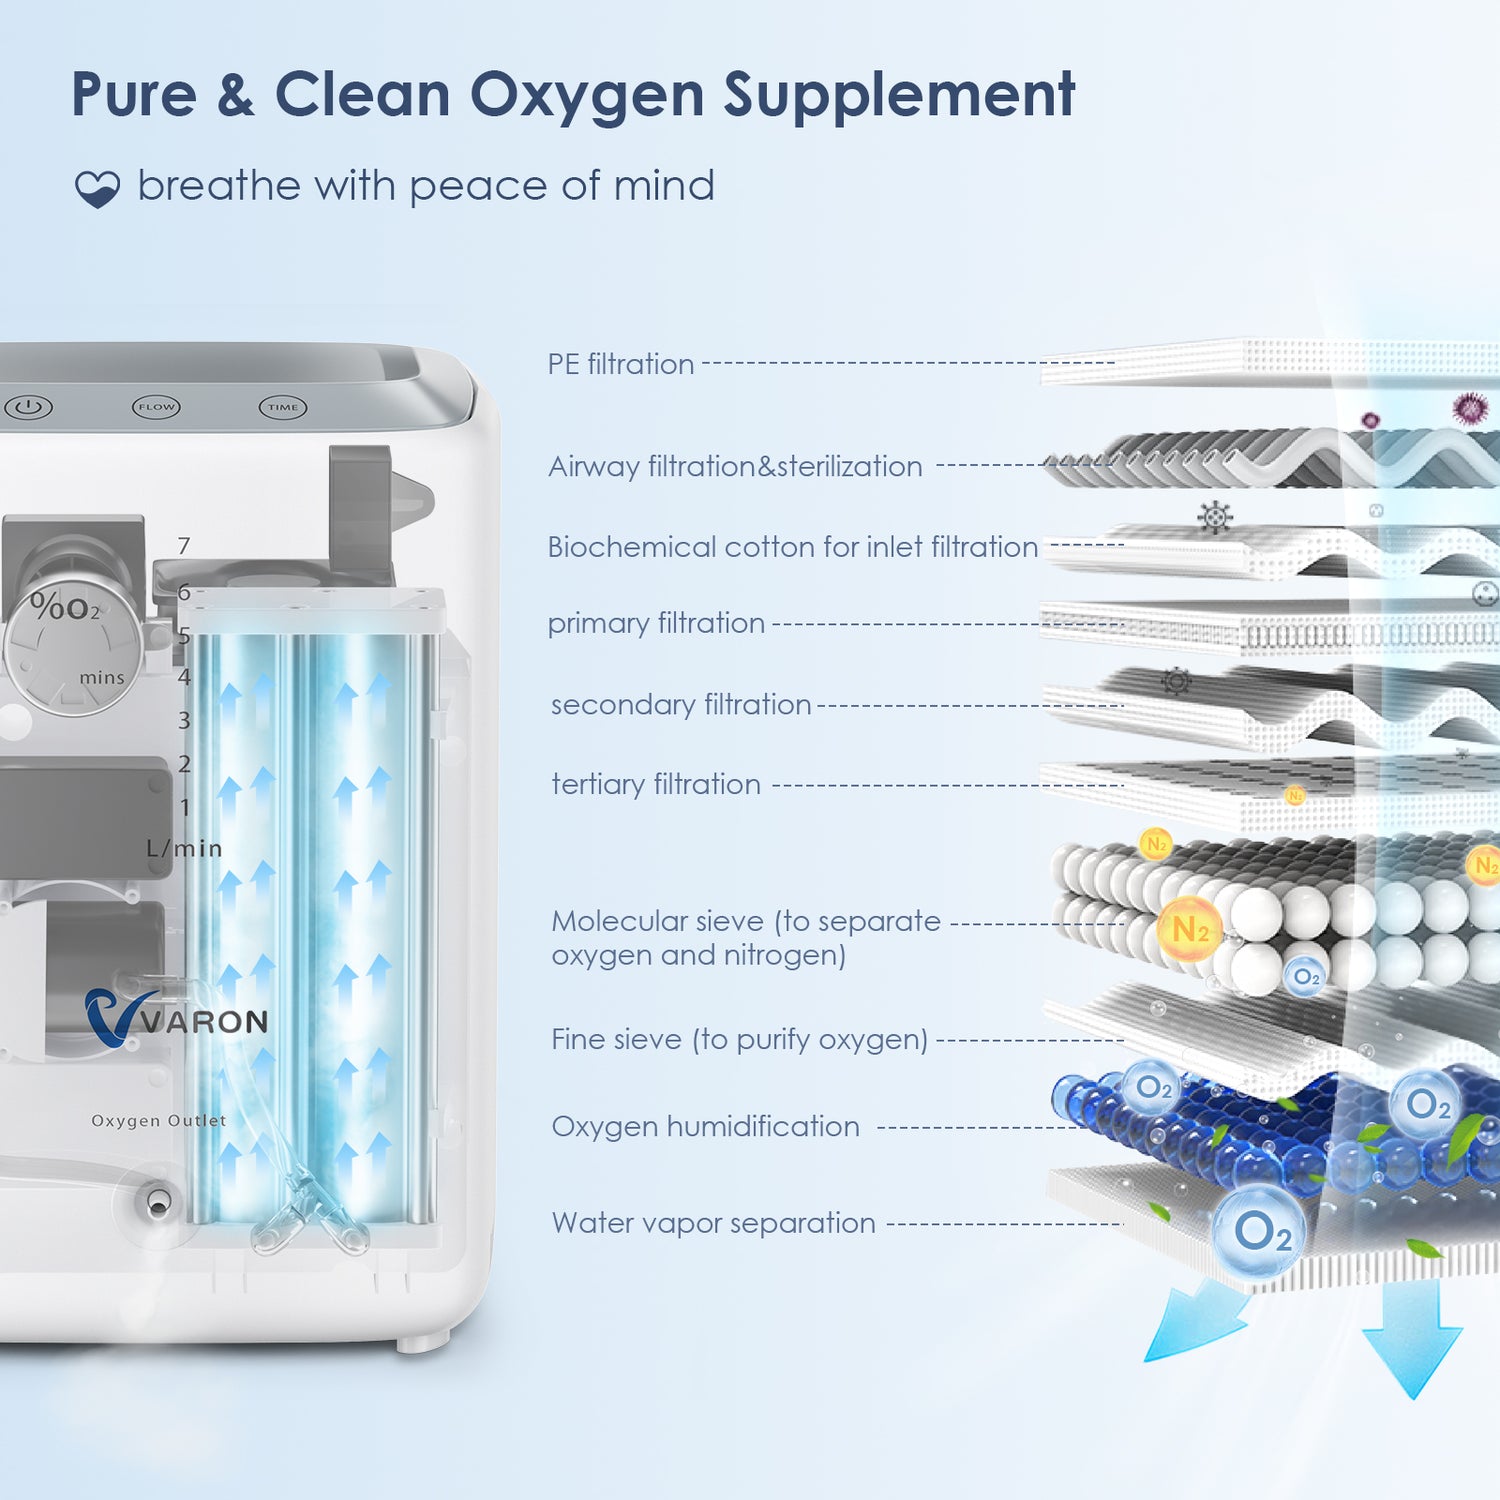 Pure and clean oxygen